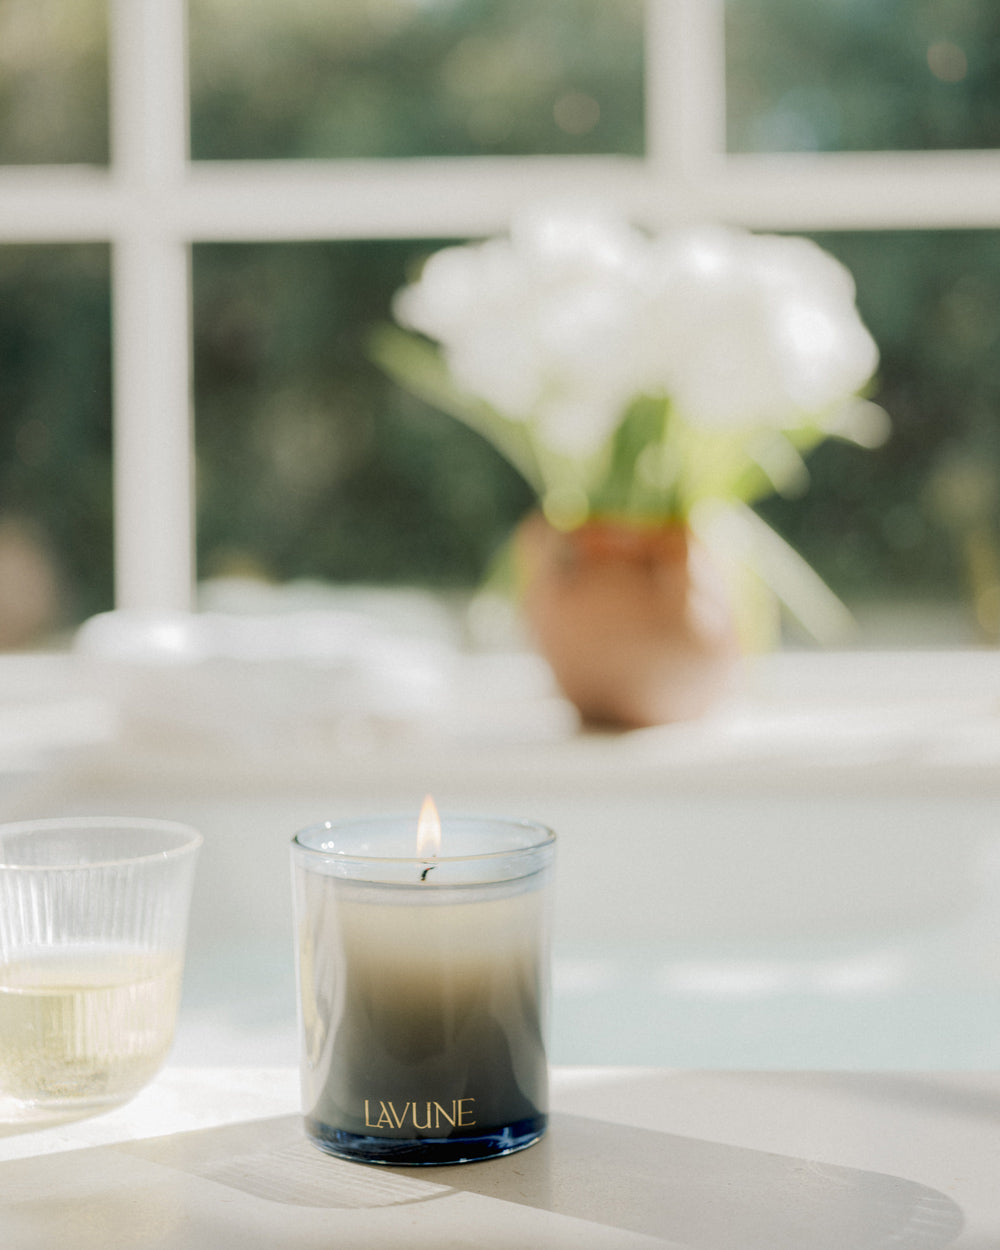 Lavune Dusk Candle